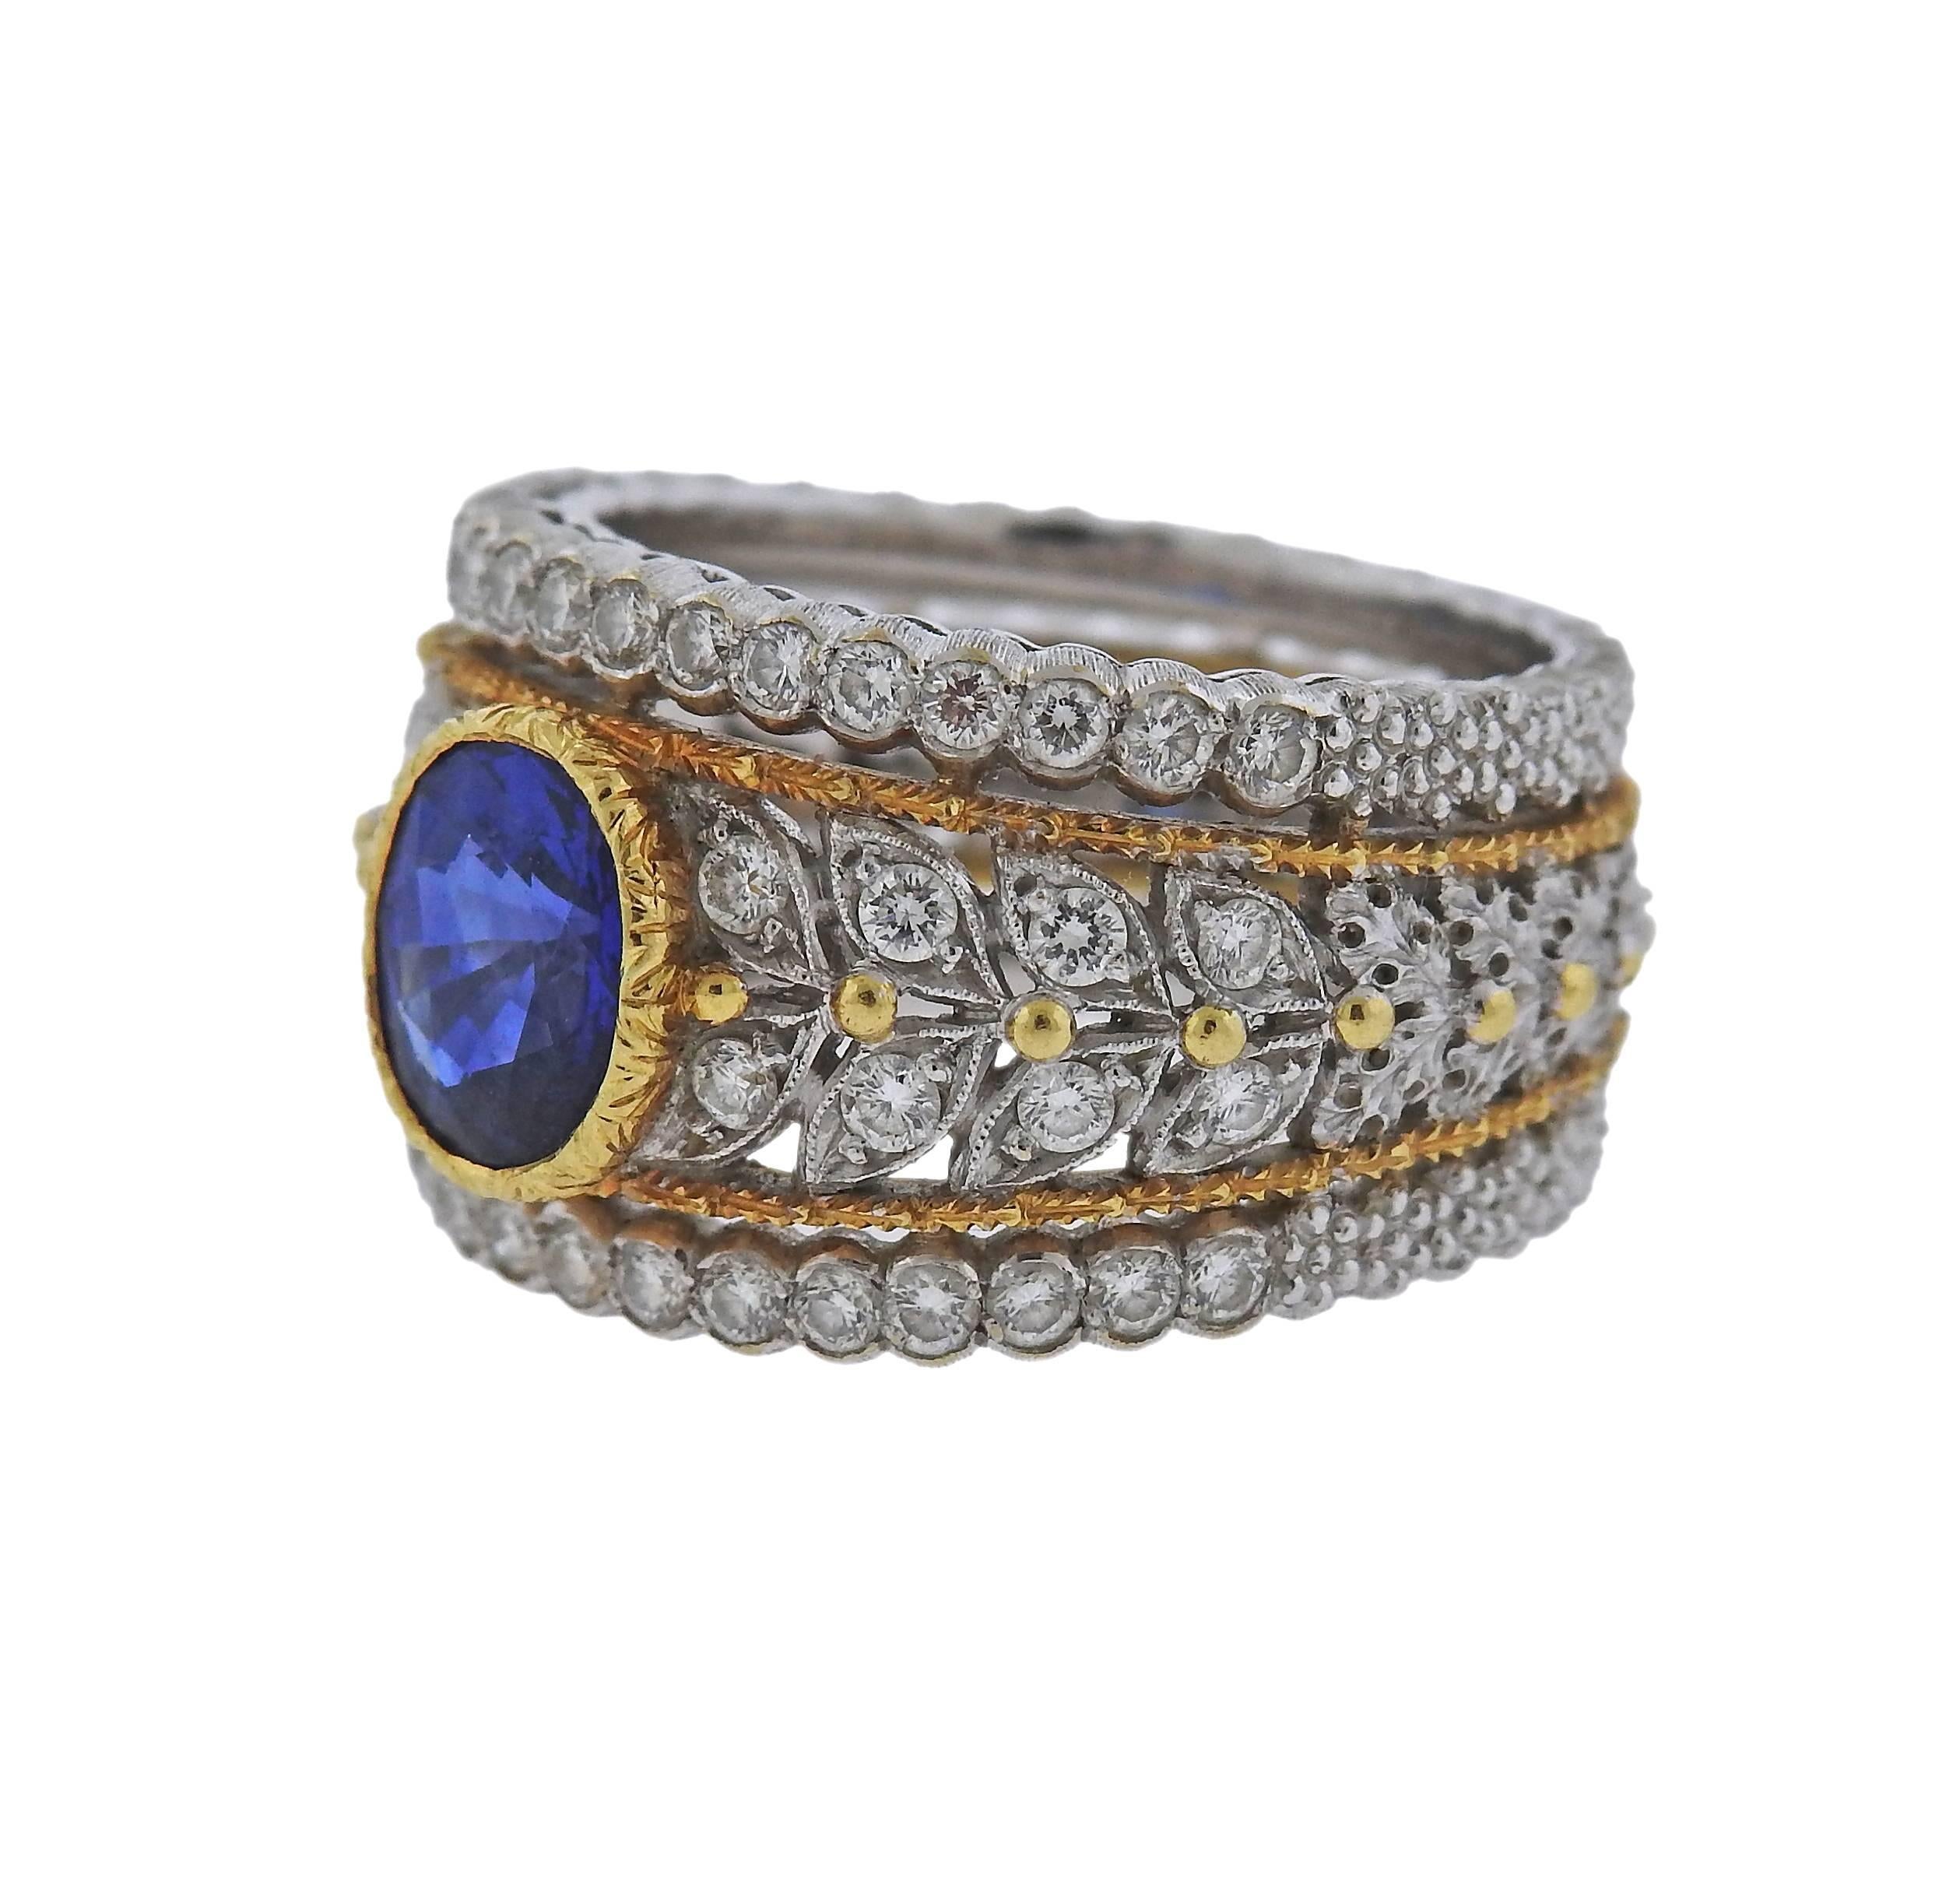 Gorgeous 18k gold ring crafted by Buccellati. Features approximately 1.50ct sapphire and 0.46ctw of H/VS diamonds. Ring size 5 1/2, widest point - 13mm. Marked Buccellati Italy 18k. Weight is 9.1 grams. Comes with Buccellati box. 